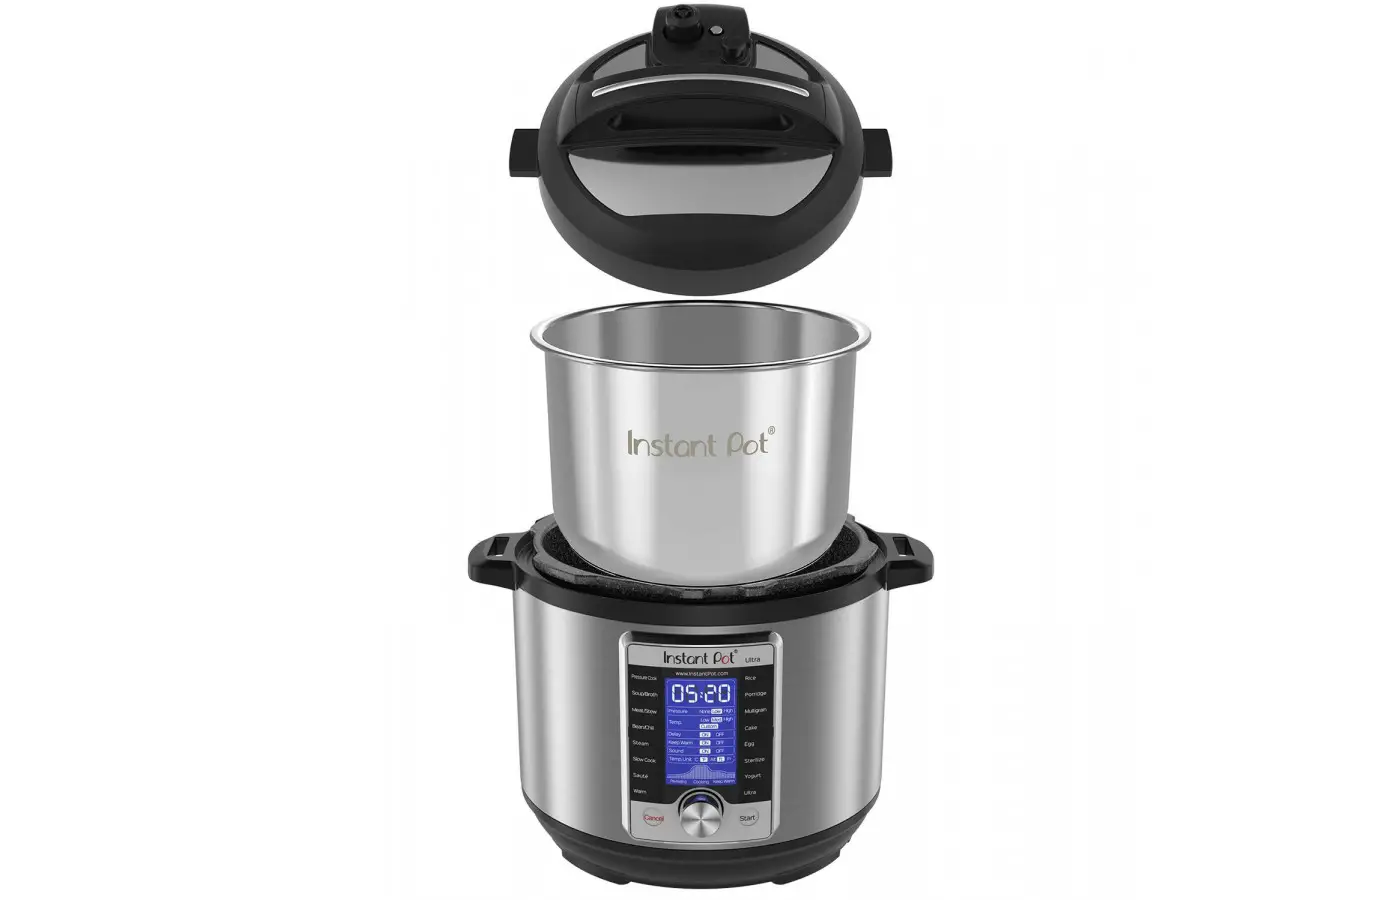 The Instant Pot Duo offers stanless steel compartments that are easy to clean and dishwasher safe.